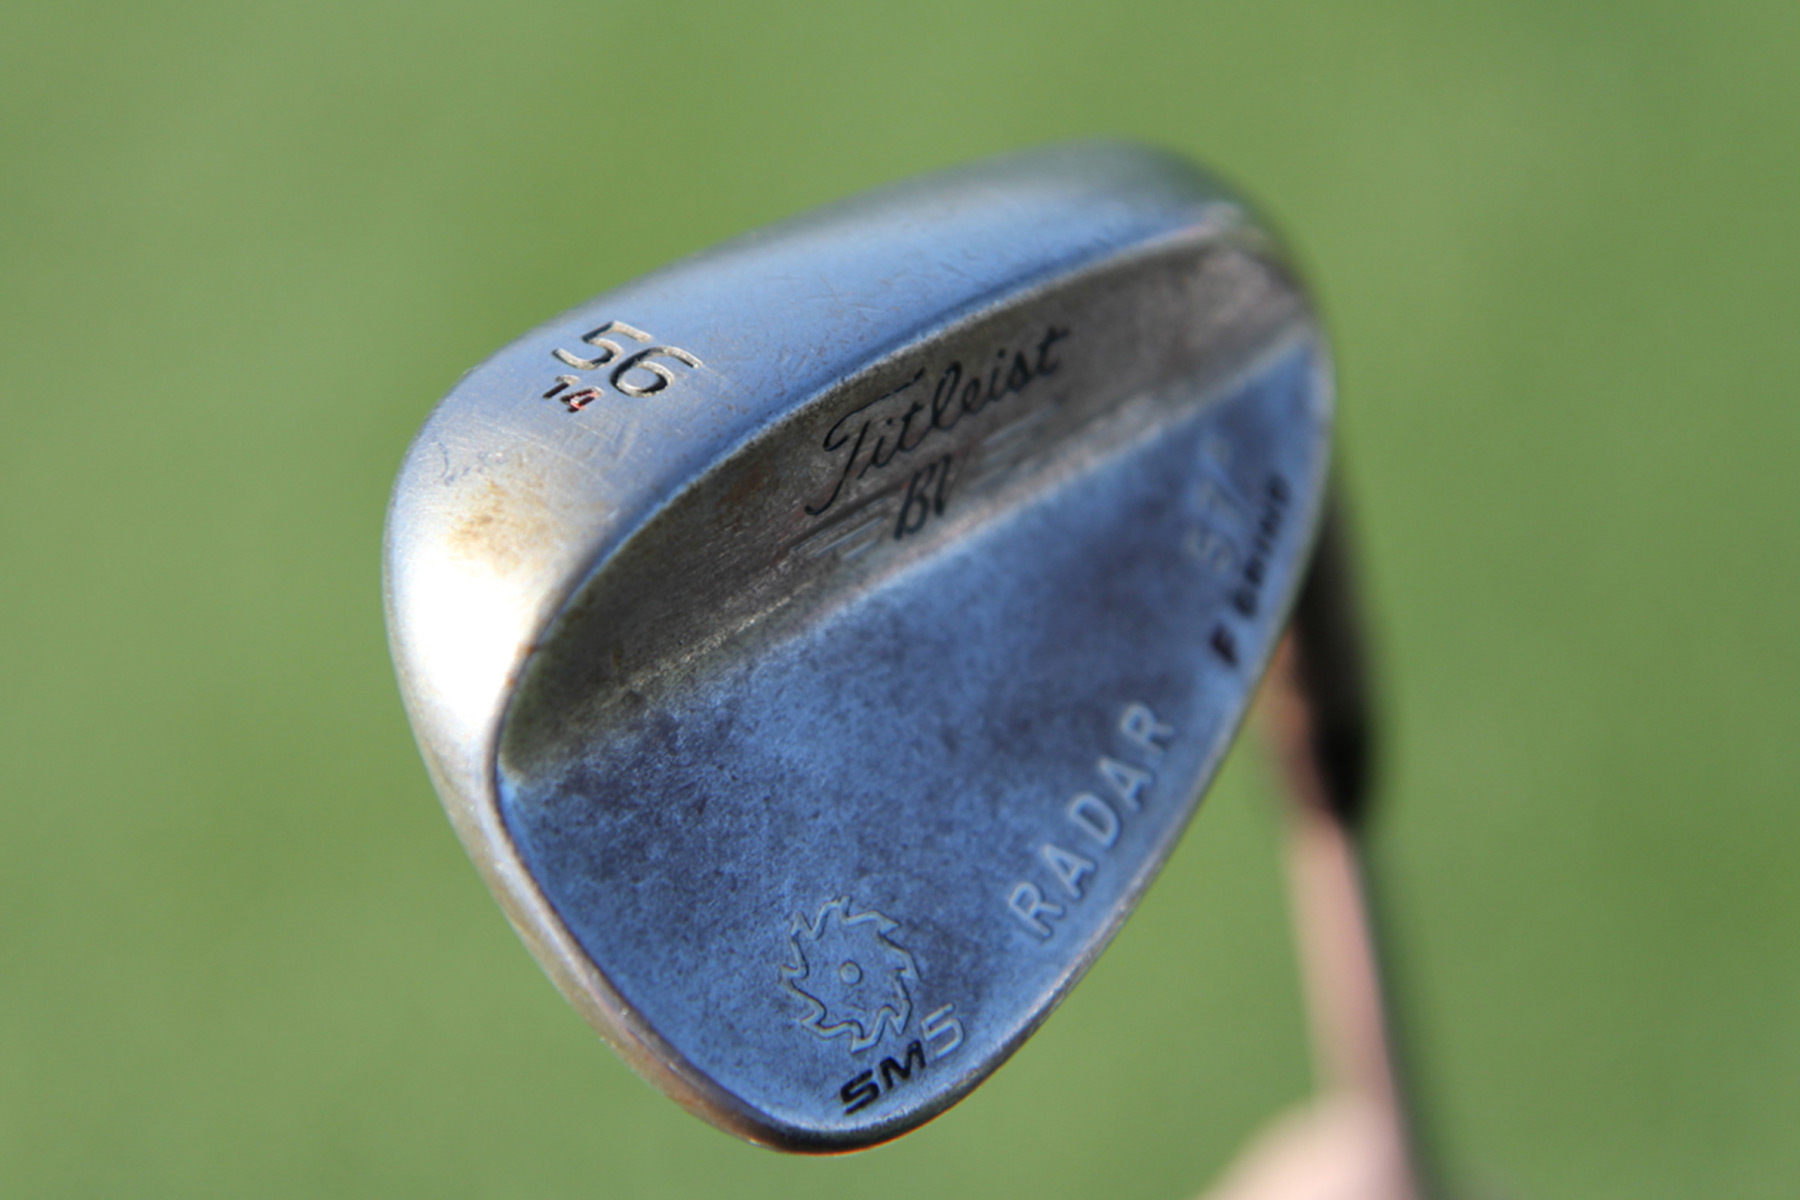 Justin sand wedge of choice, a Vokey SM5 56.14...